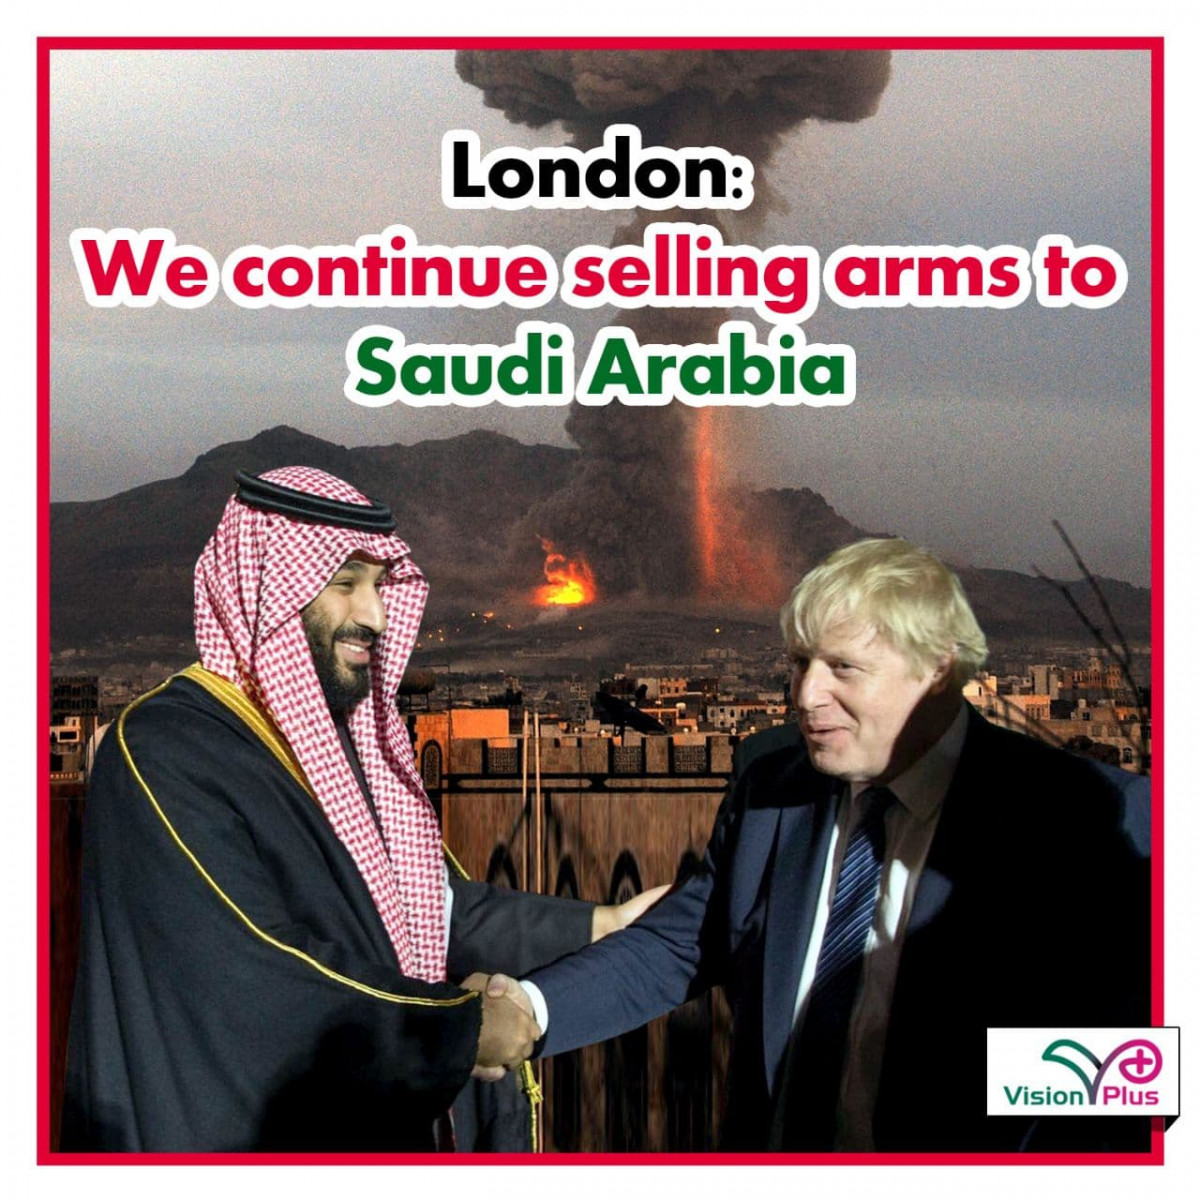 London: We continue selling arms to Saudi Arabia